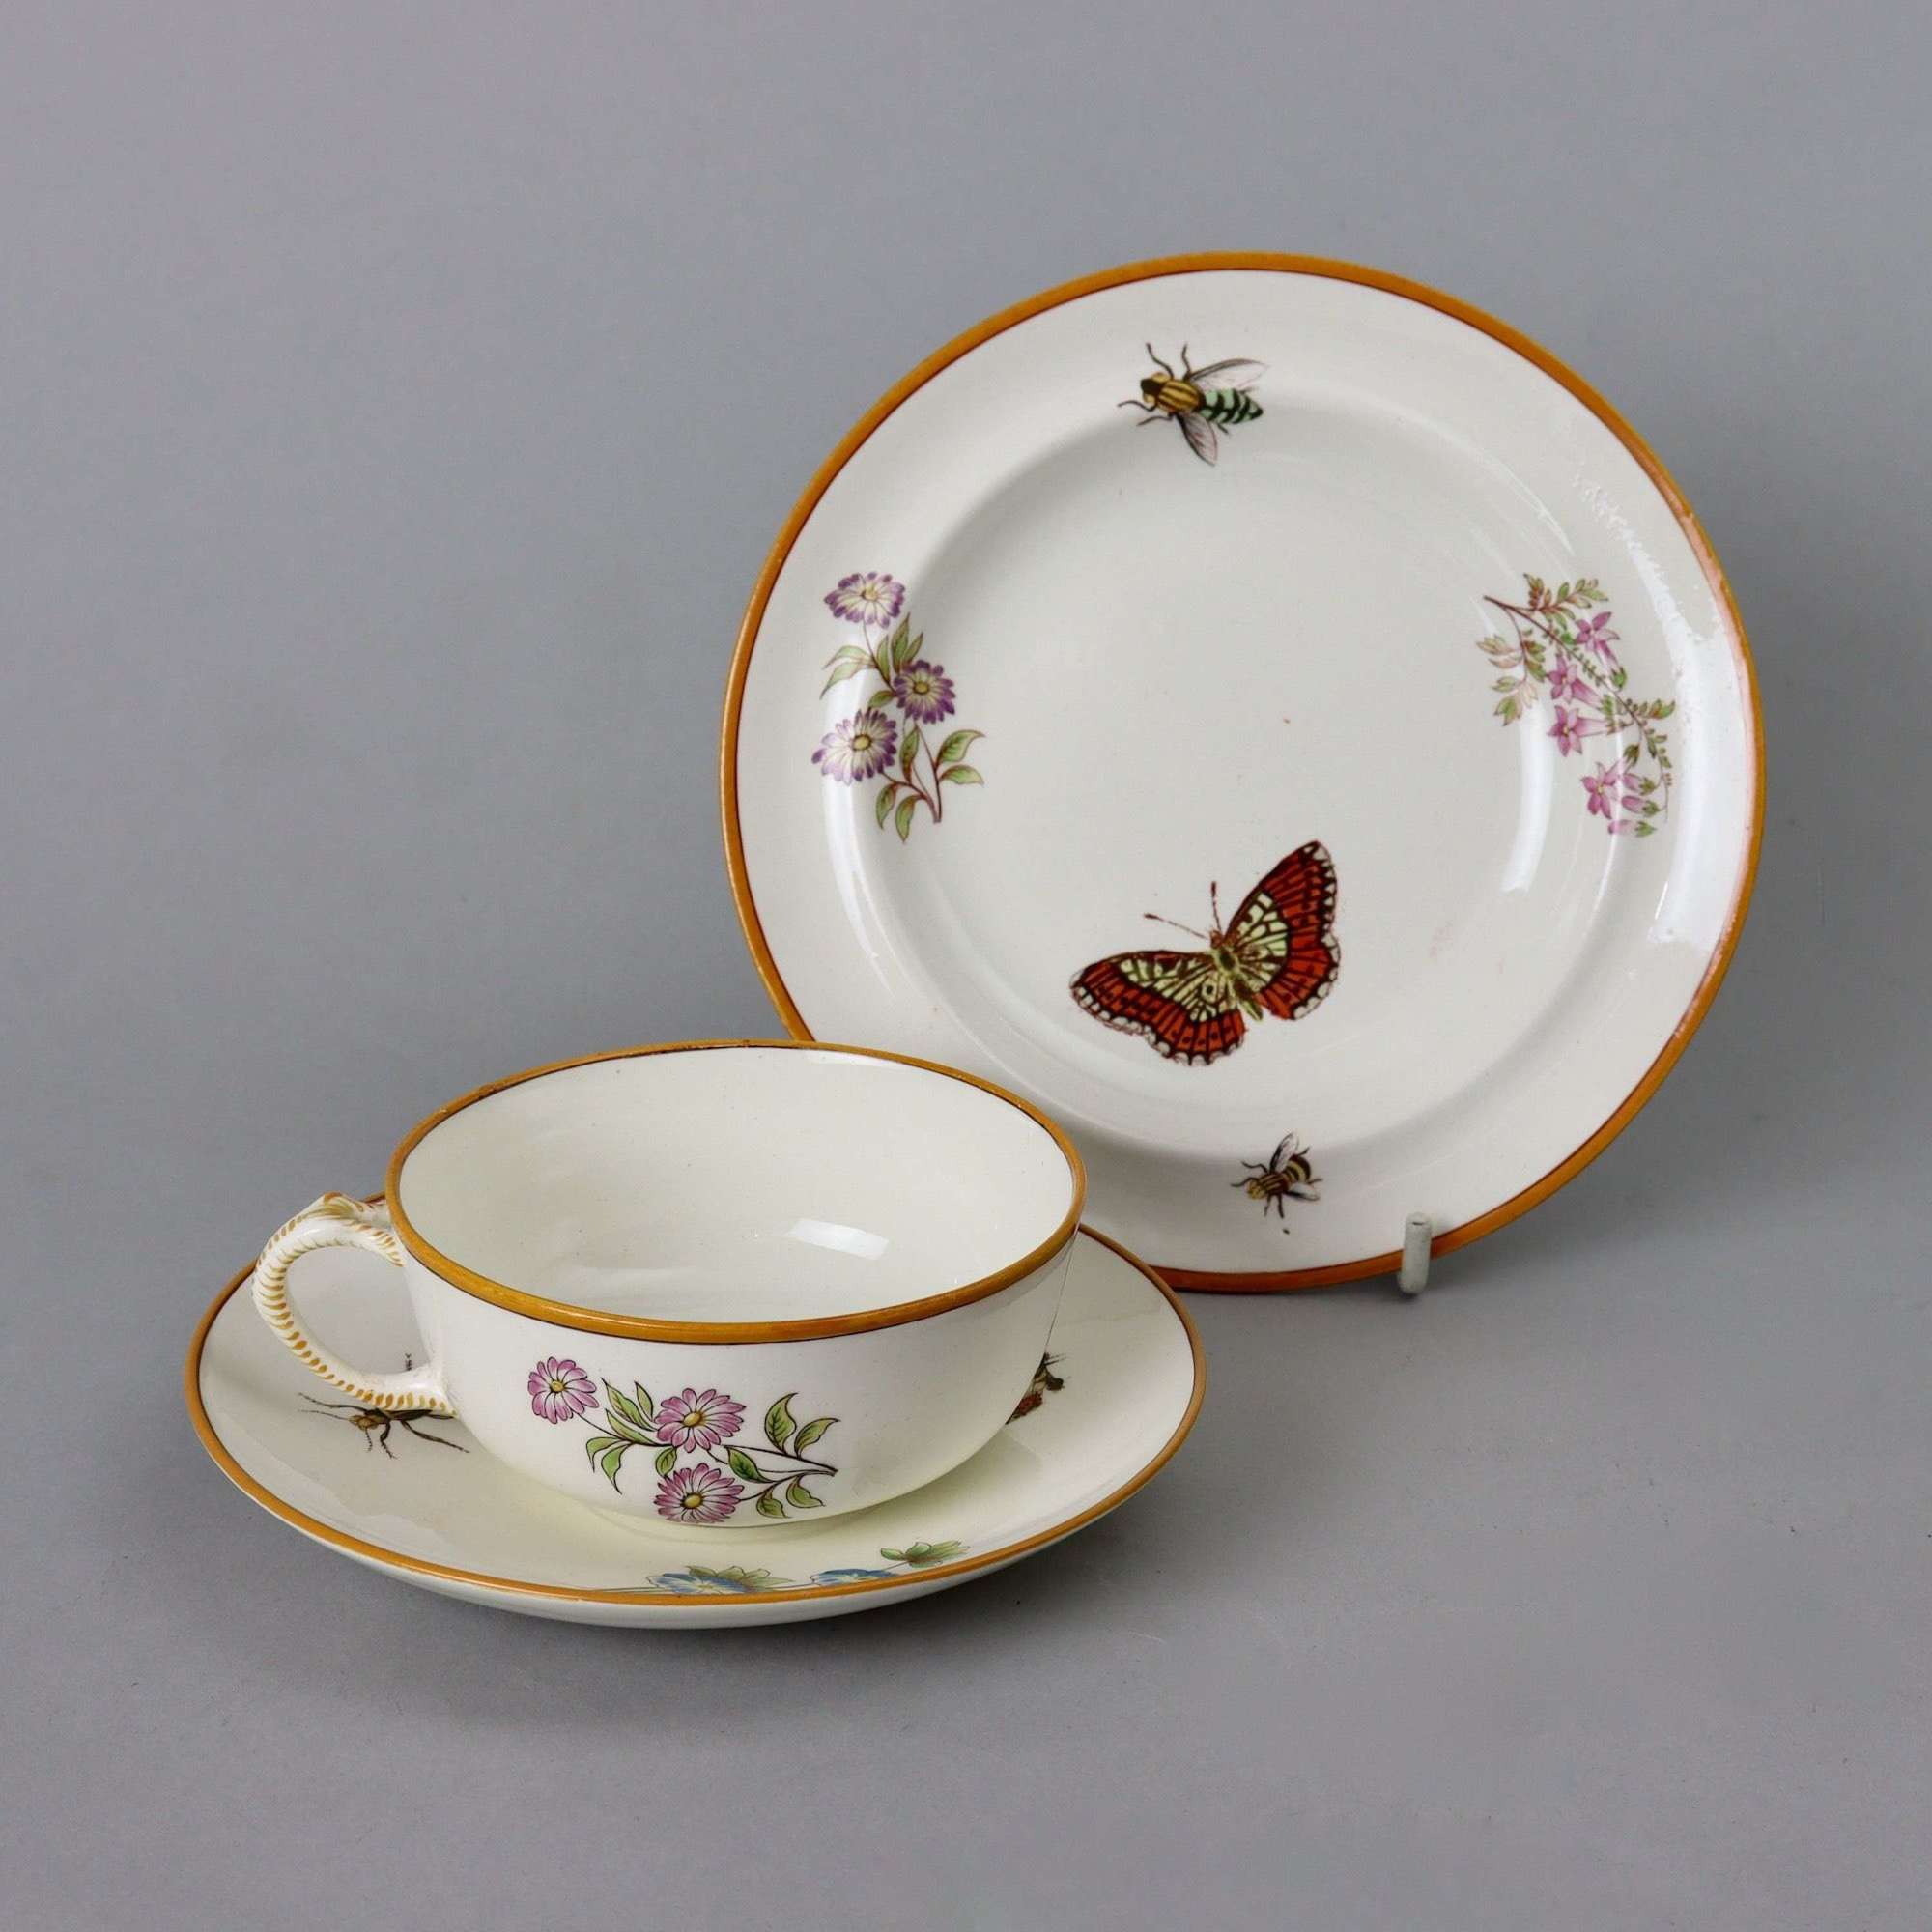 Wedgwood Trio decorated with Insects